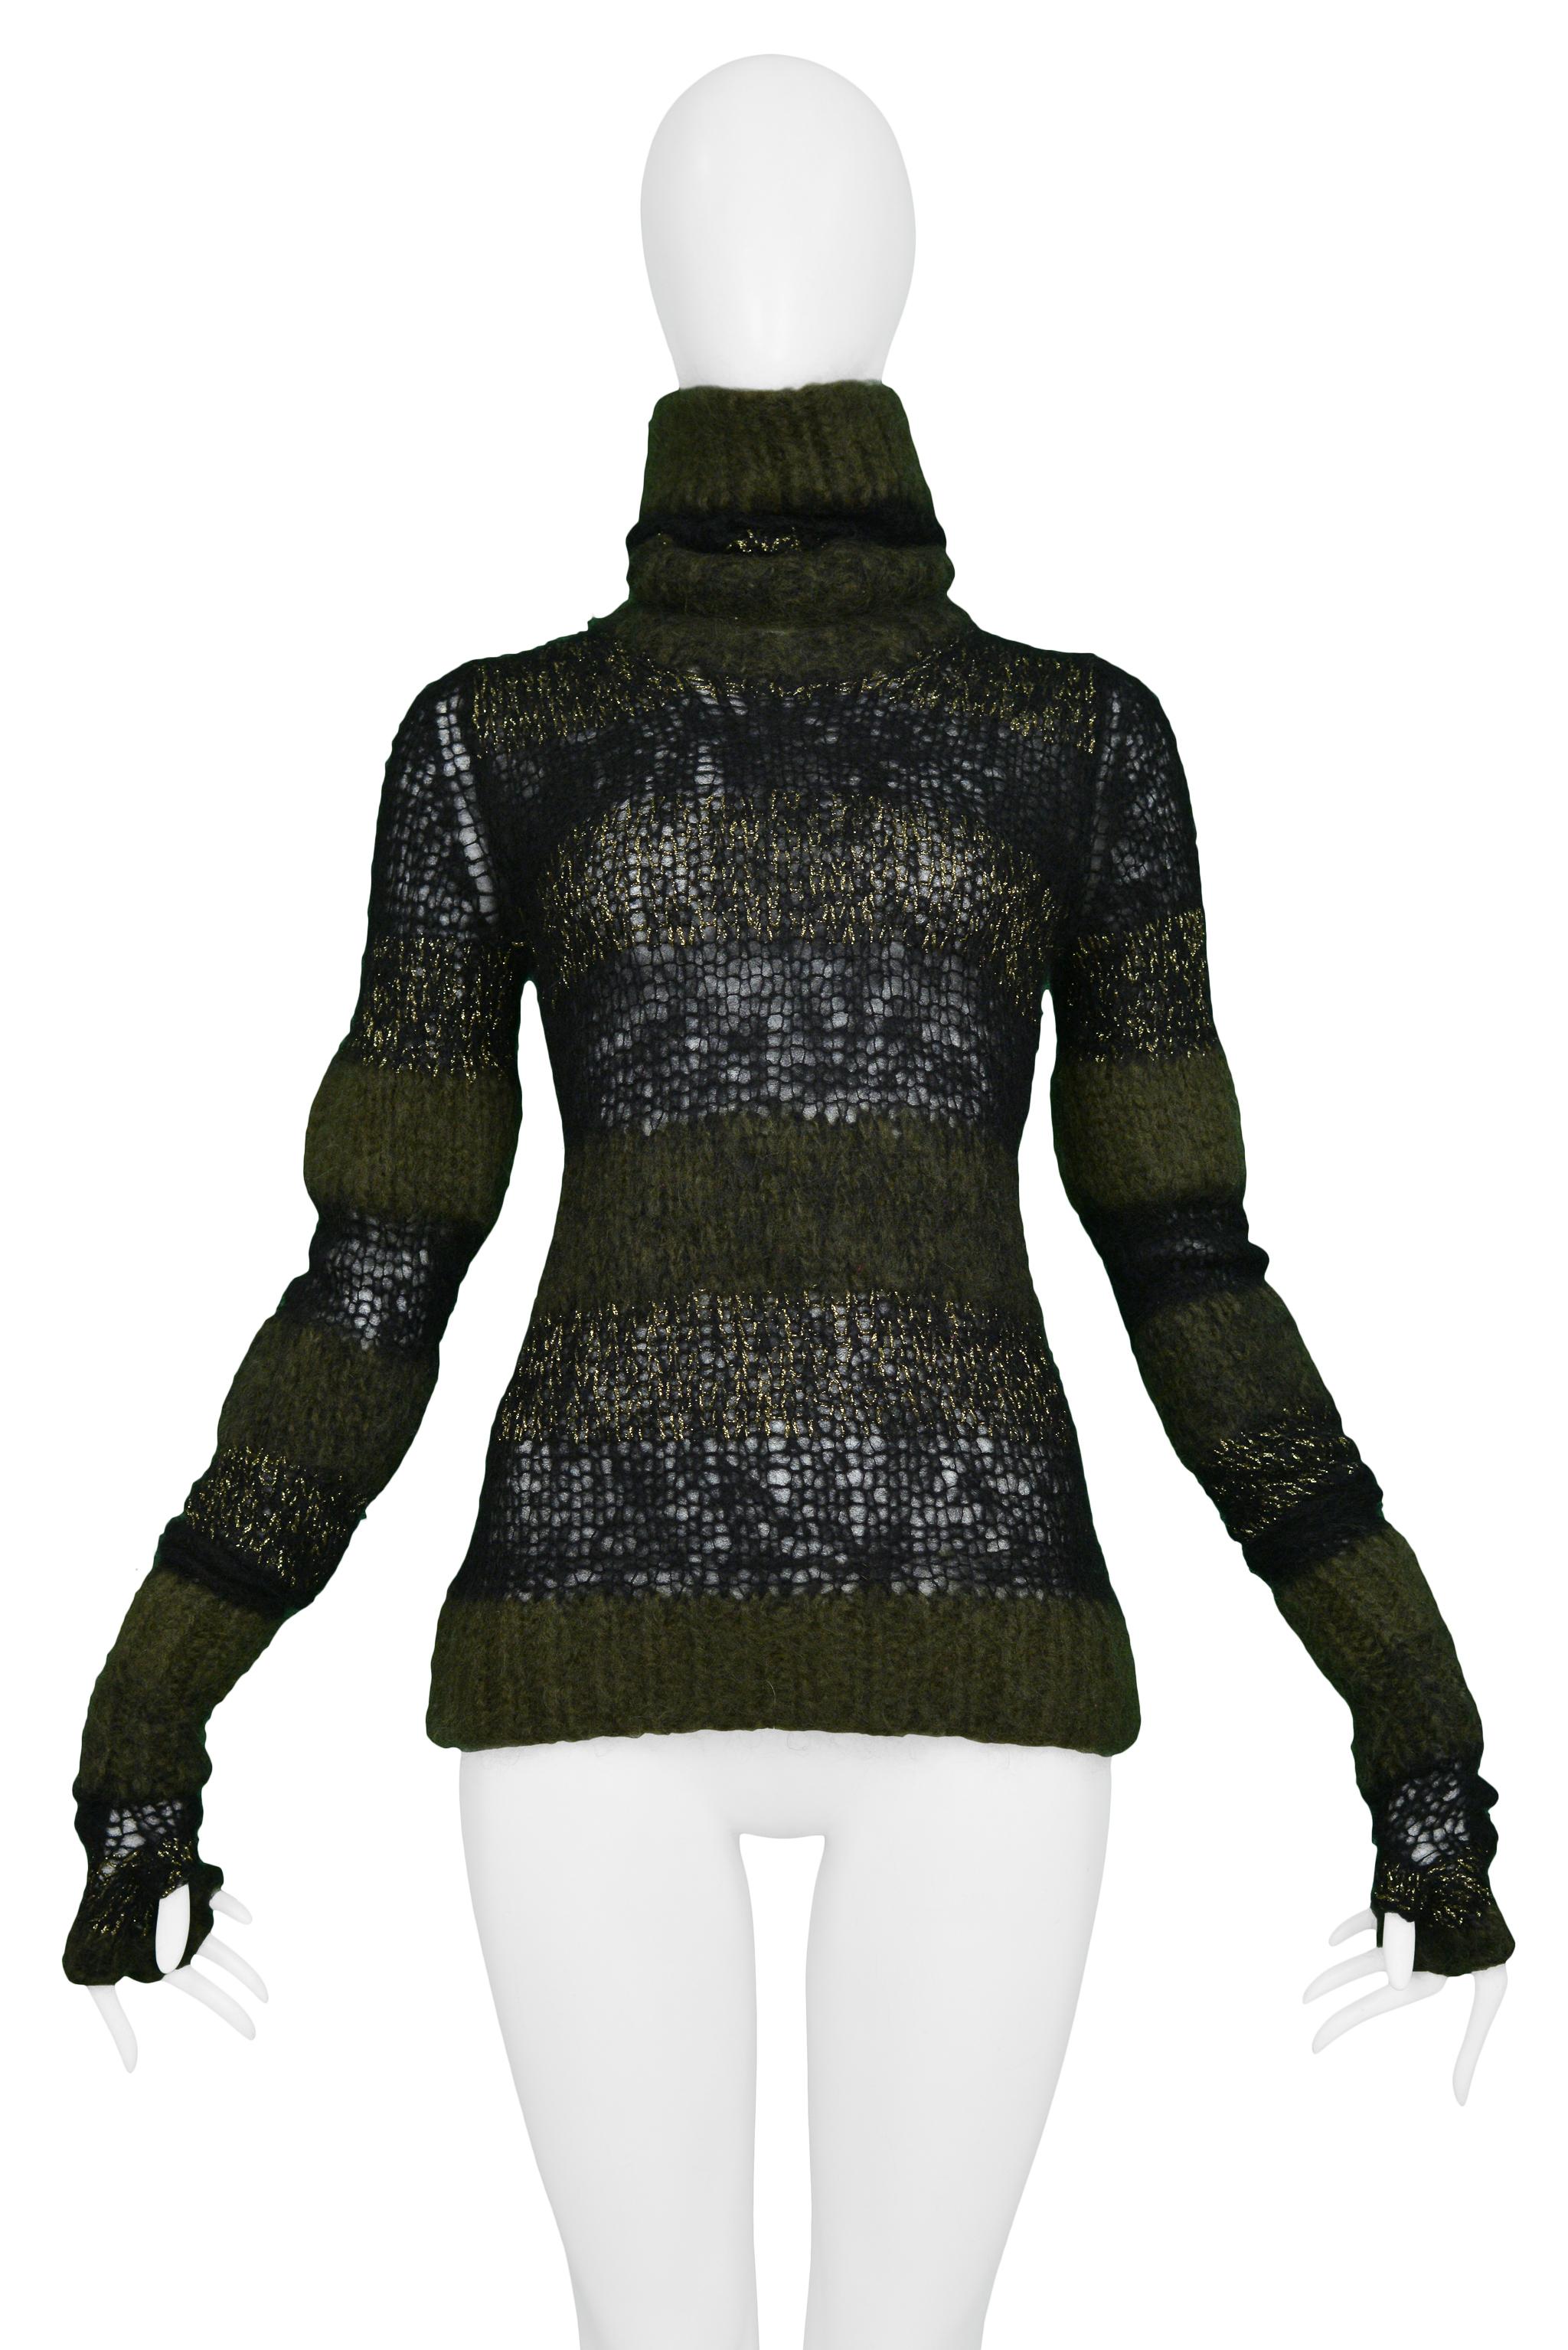 Resurrection Vintage is excited to offer a vintage Junya Watanabe black, metallic gold, and olive green cobweb sweater featuring a high neck, open weave panels, and extra-long sleeves with fingerless gloves. 

Junya Watanabe
Size: